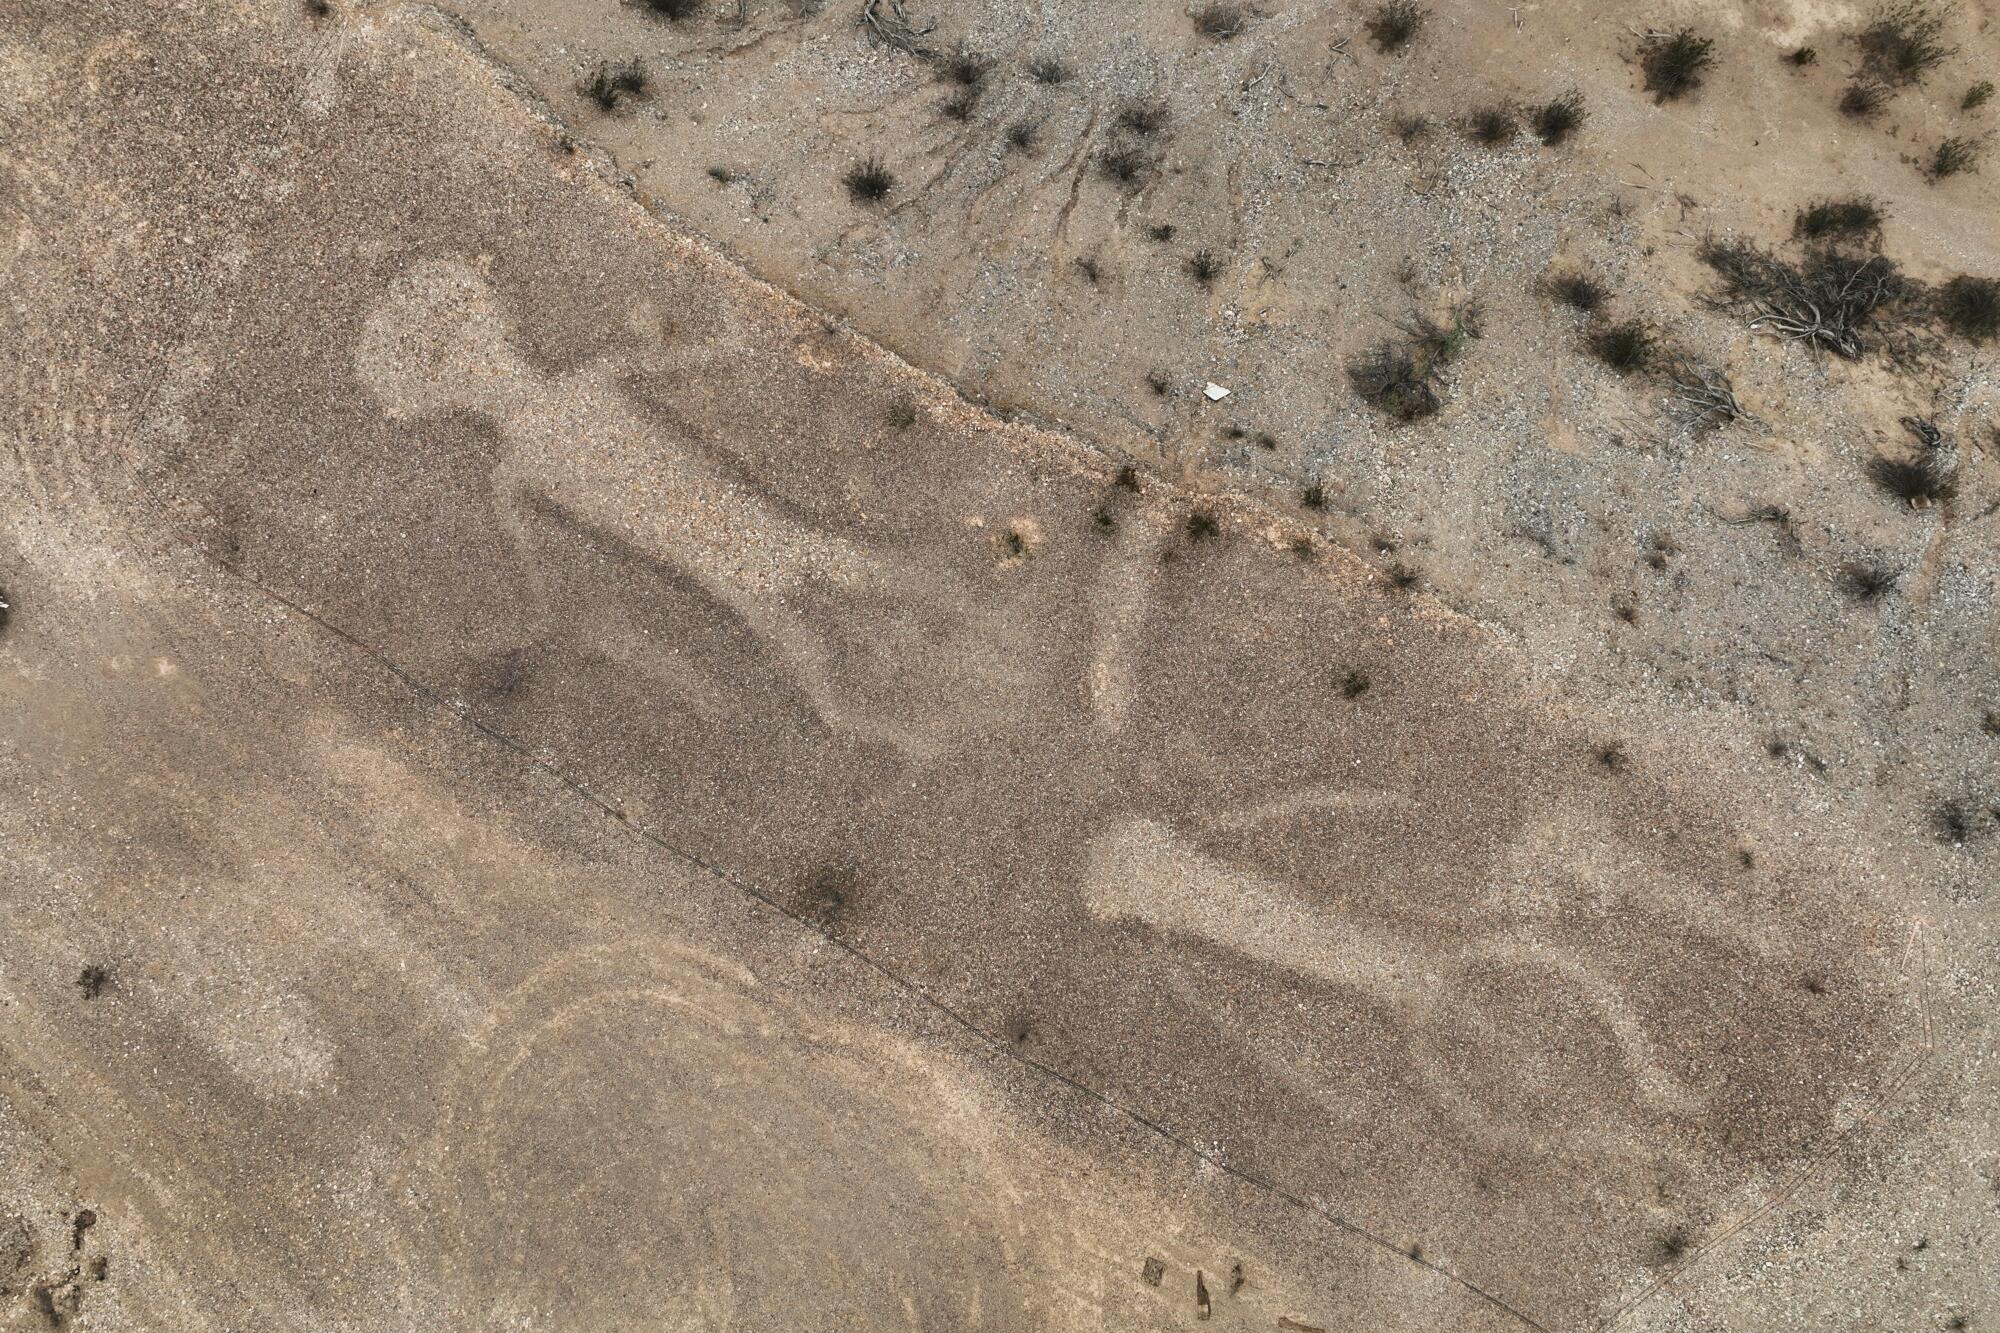 Images of two human forms are etched in the earth. 